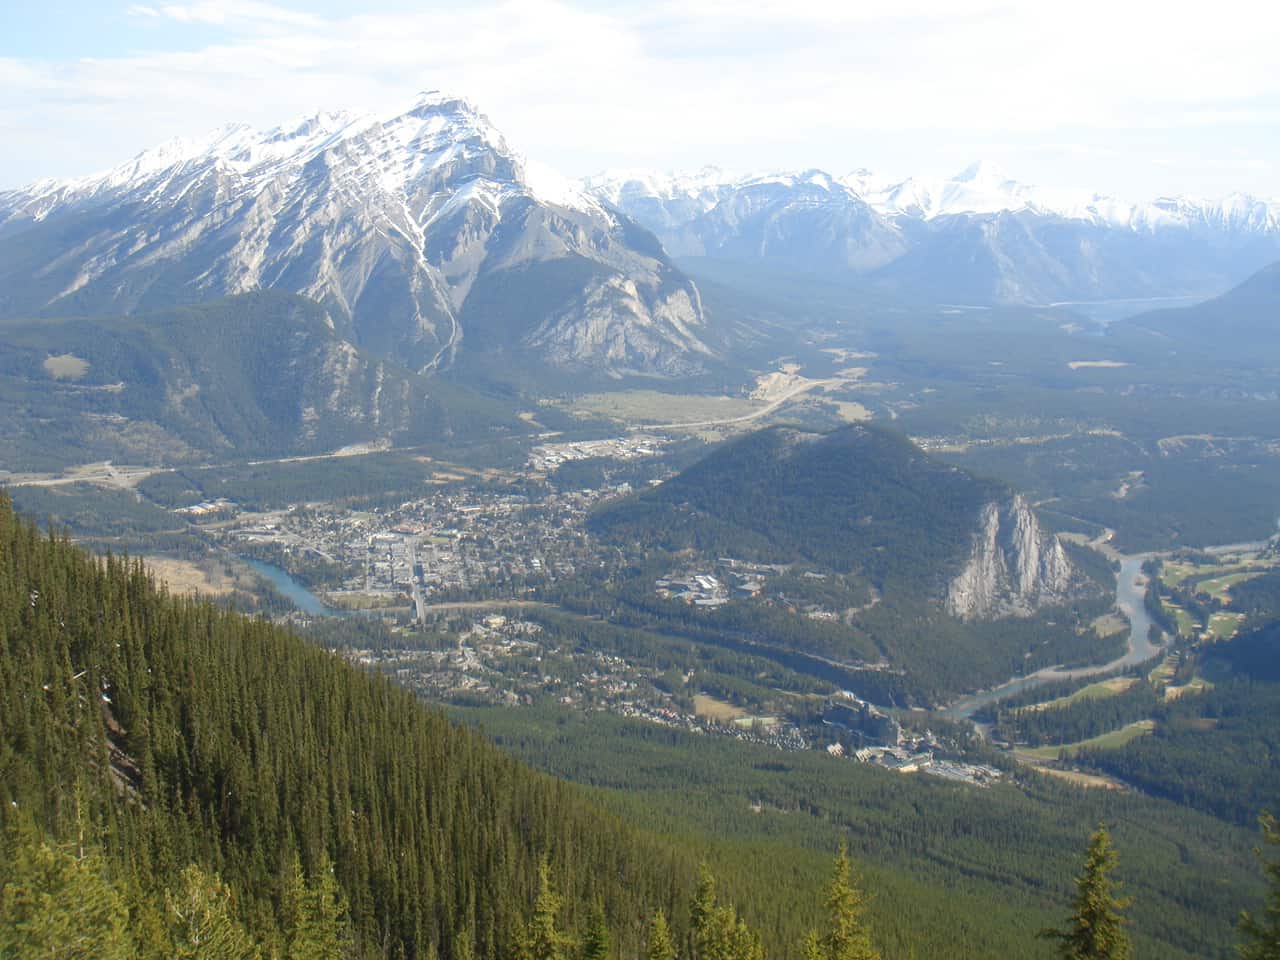 View of Banff, Canada